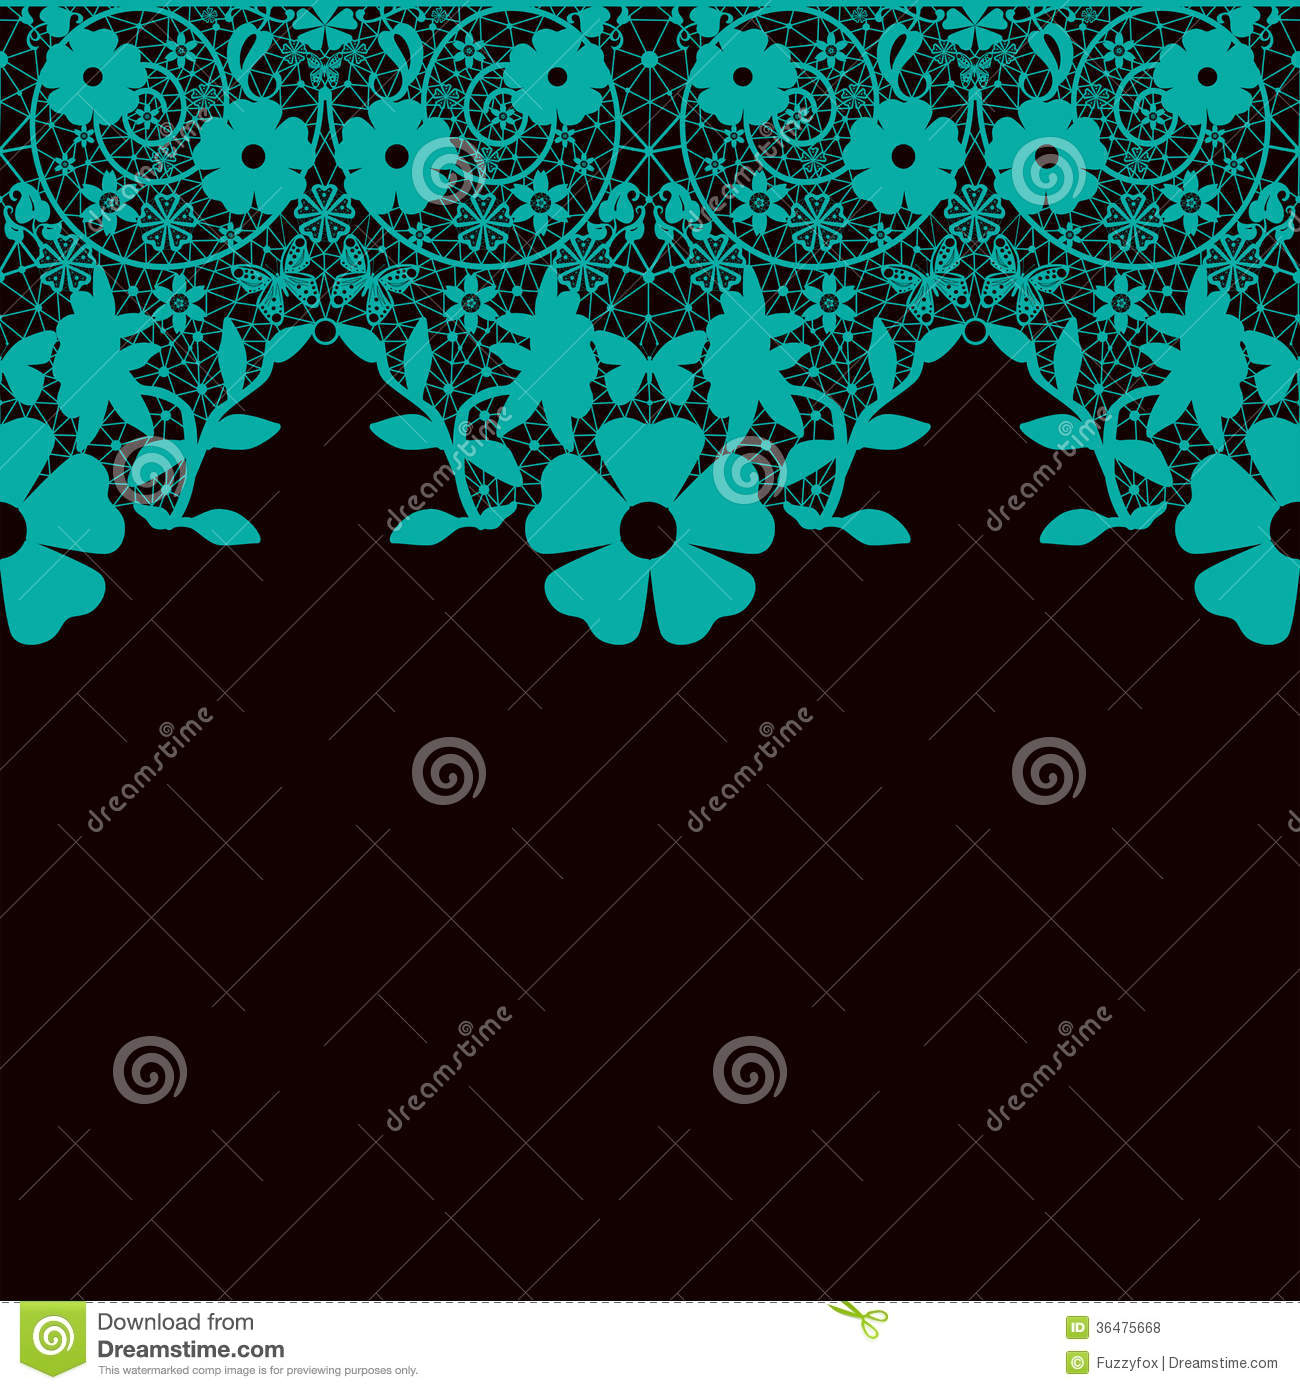 Turquoise Black Pics, Pattern Collection